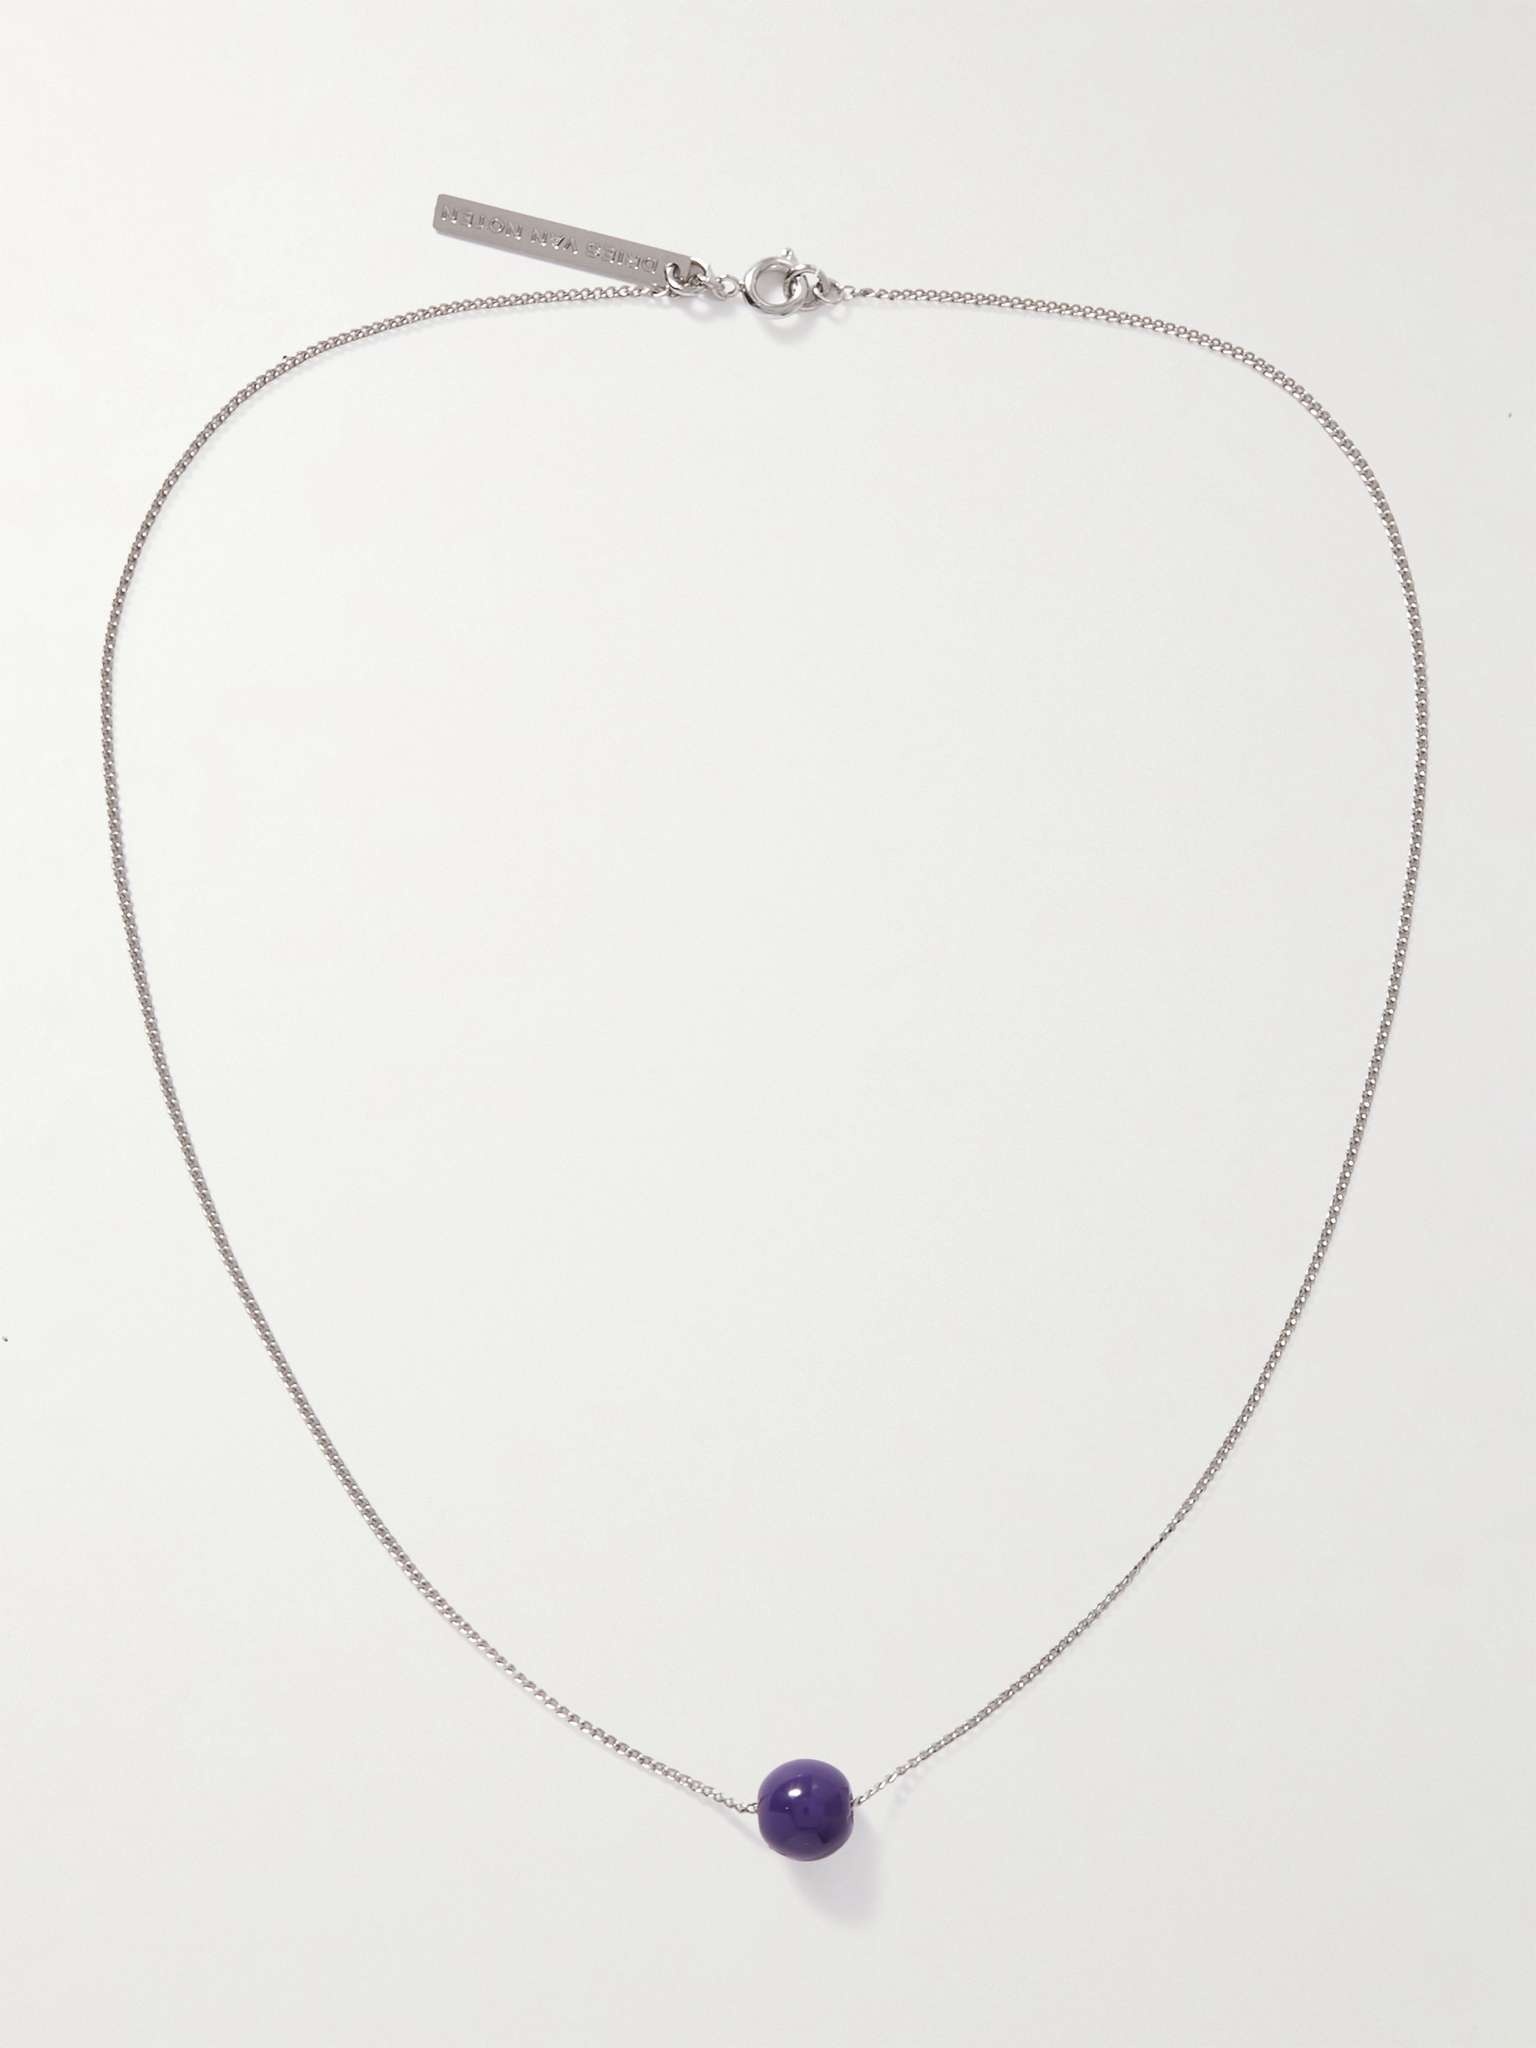 Silver-Tone and Enamel Chain Necklace - 4